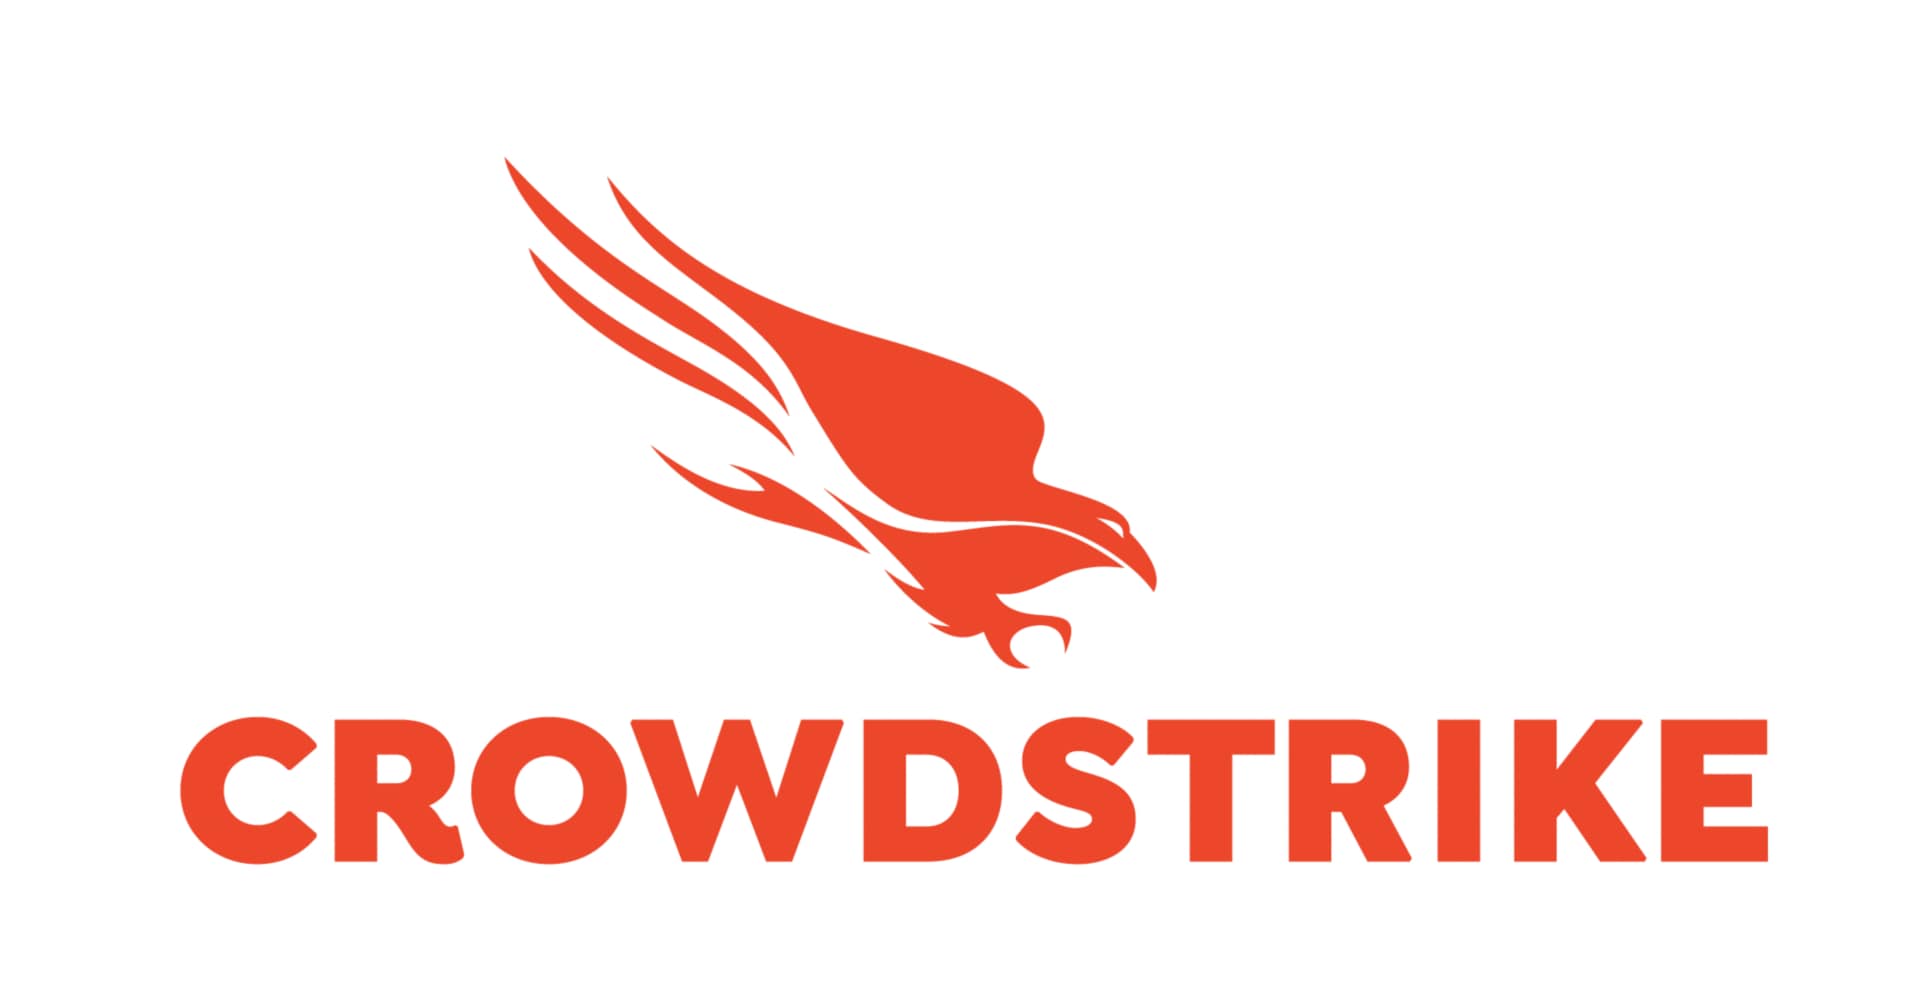 CrowdStrike 37-Month Falcon Cloud Security Reserved - Flex Software